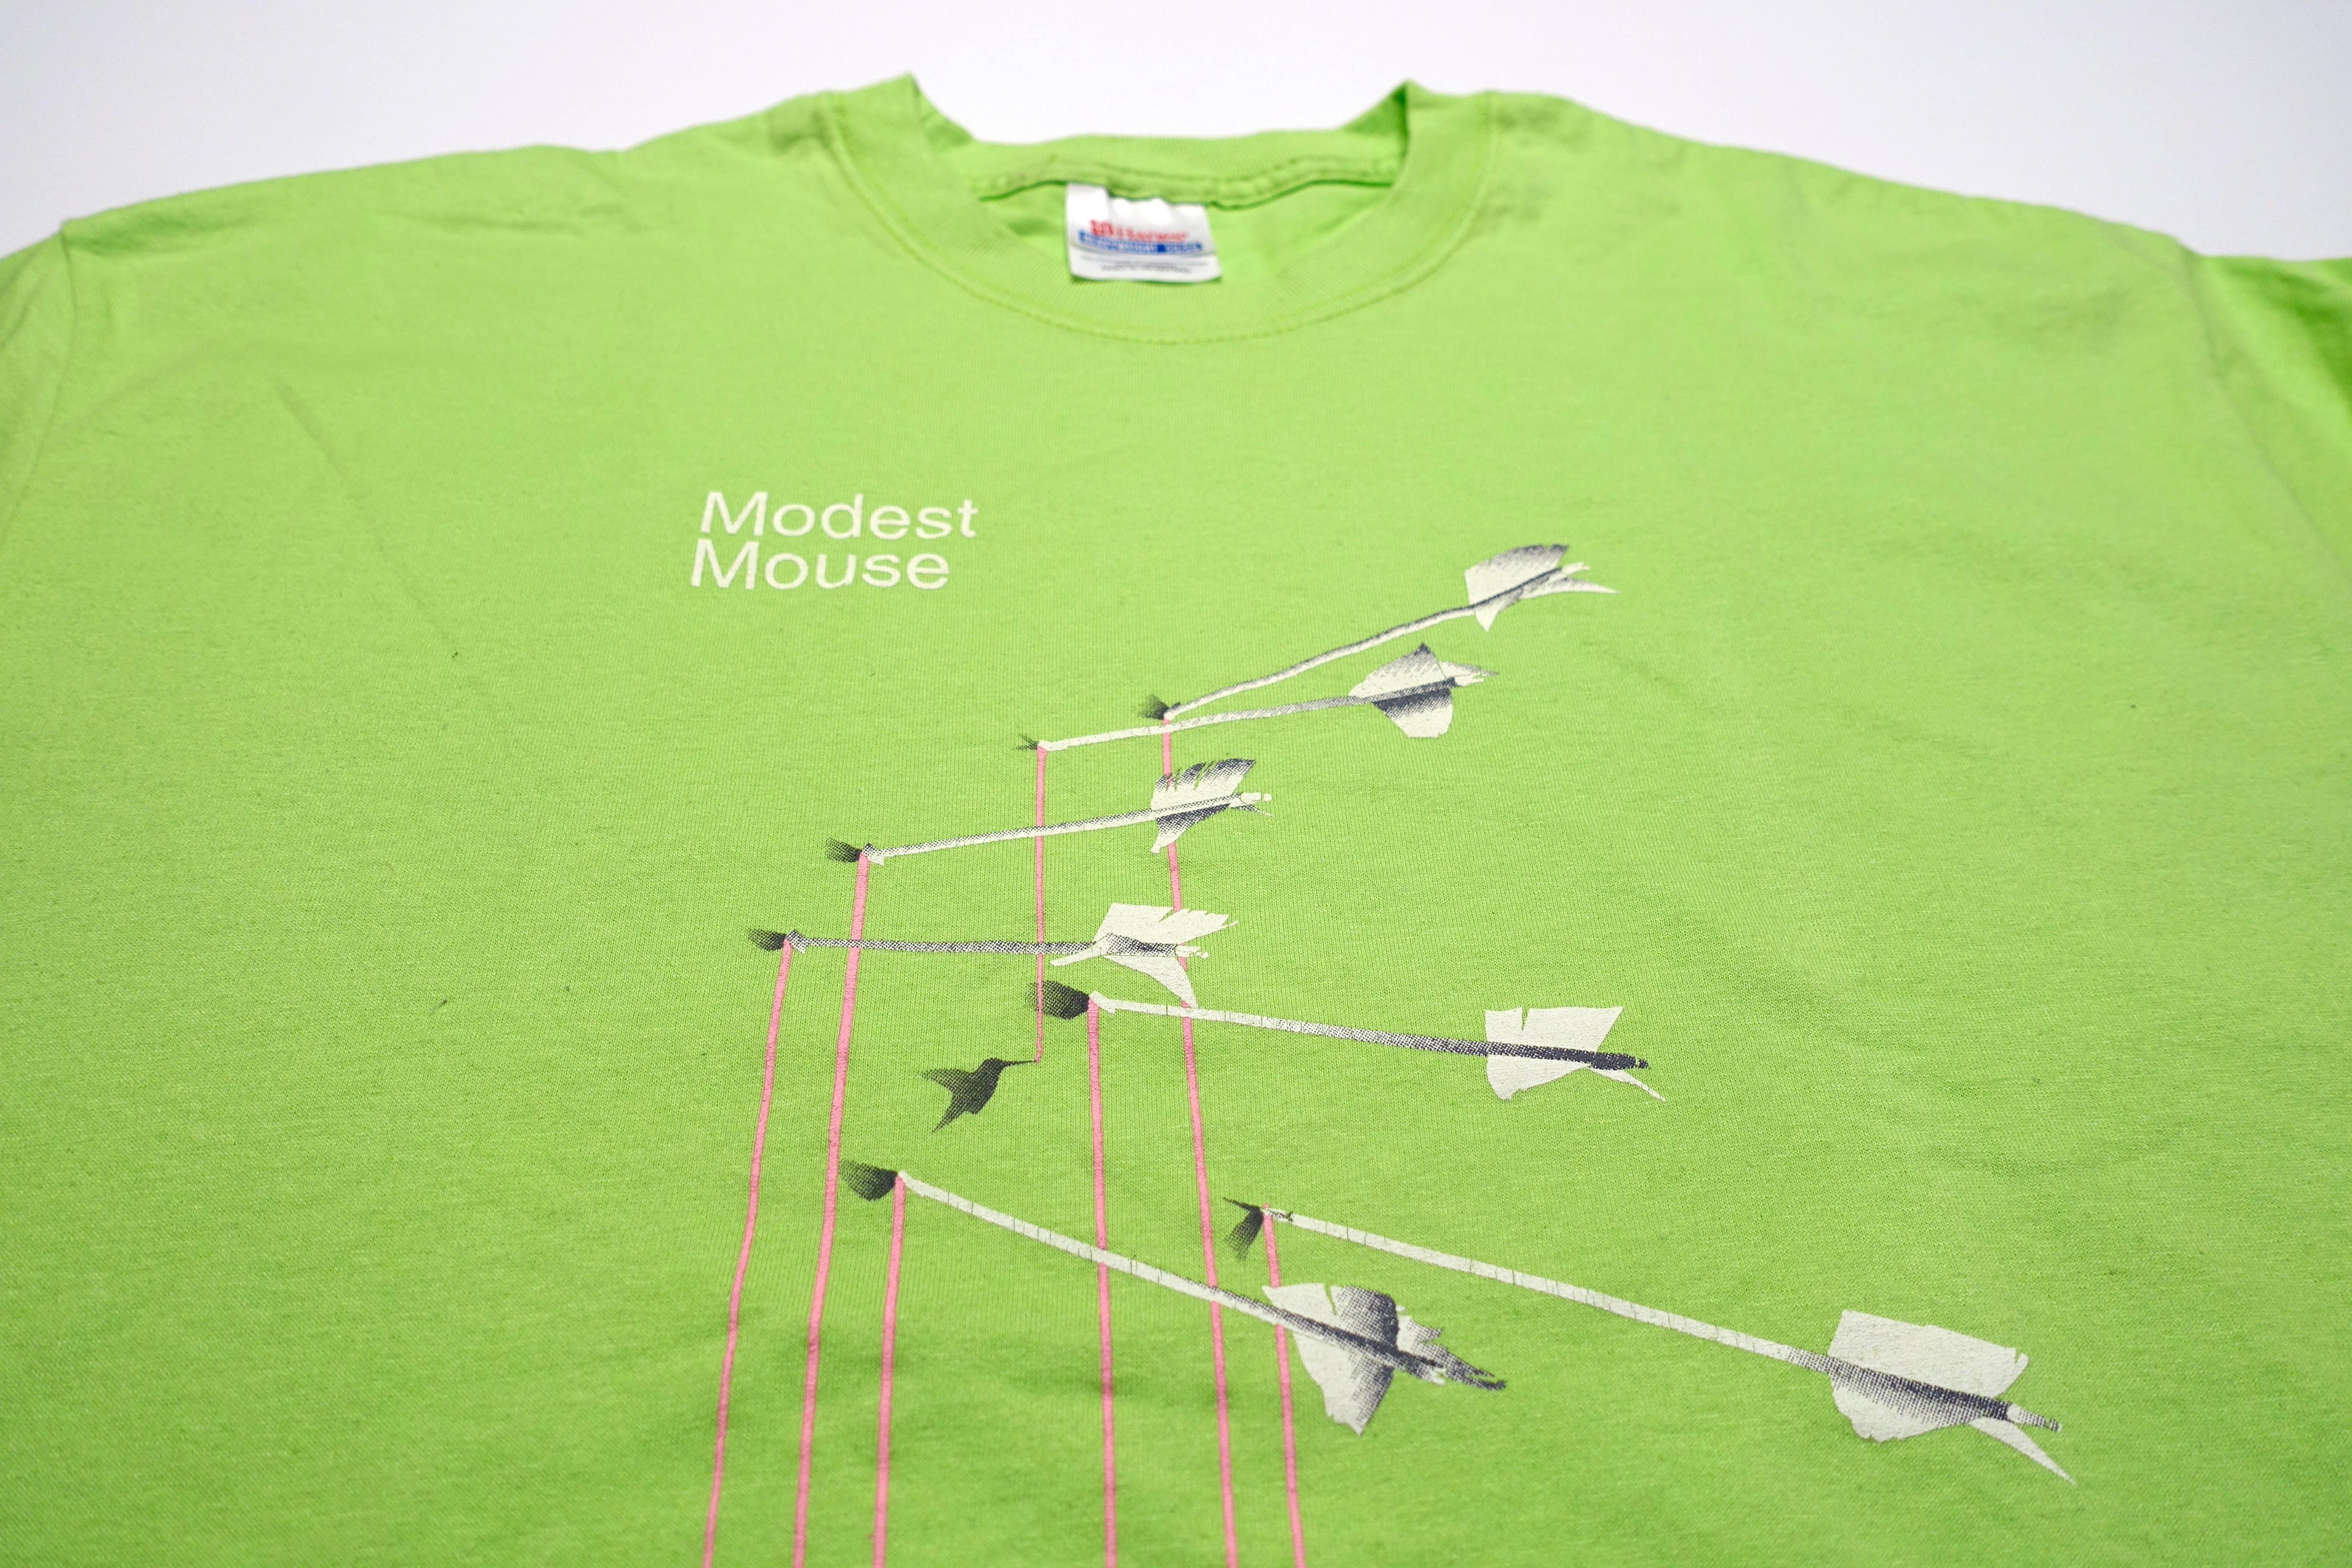 Modest Mouse - Good News For People Who Love Bad News 2004 Tour Shirt Size XL